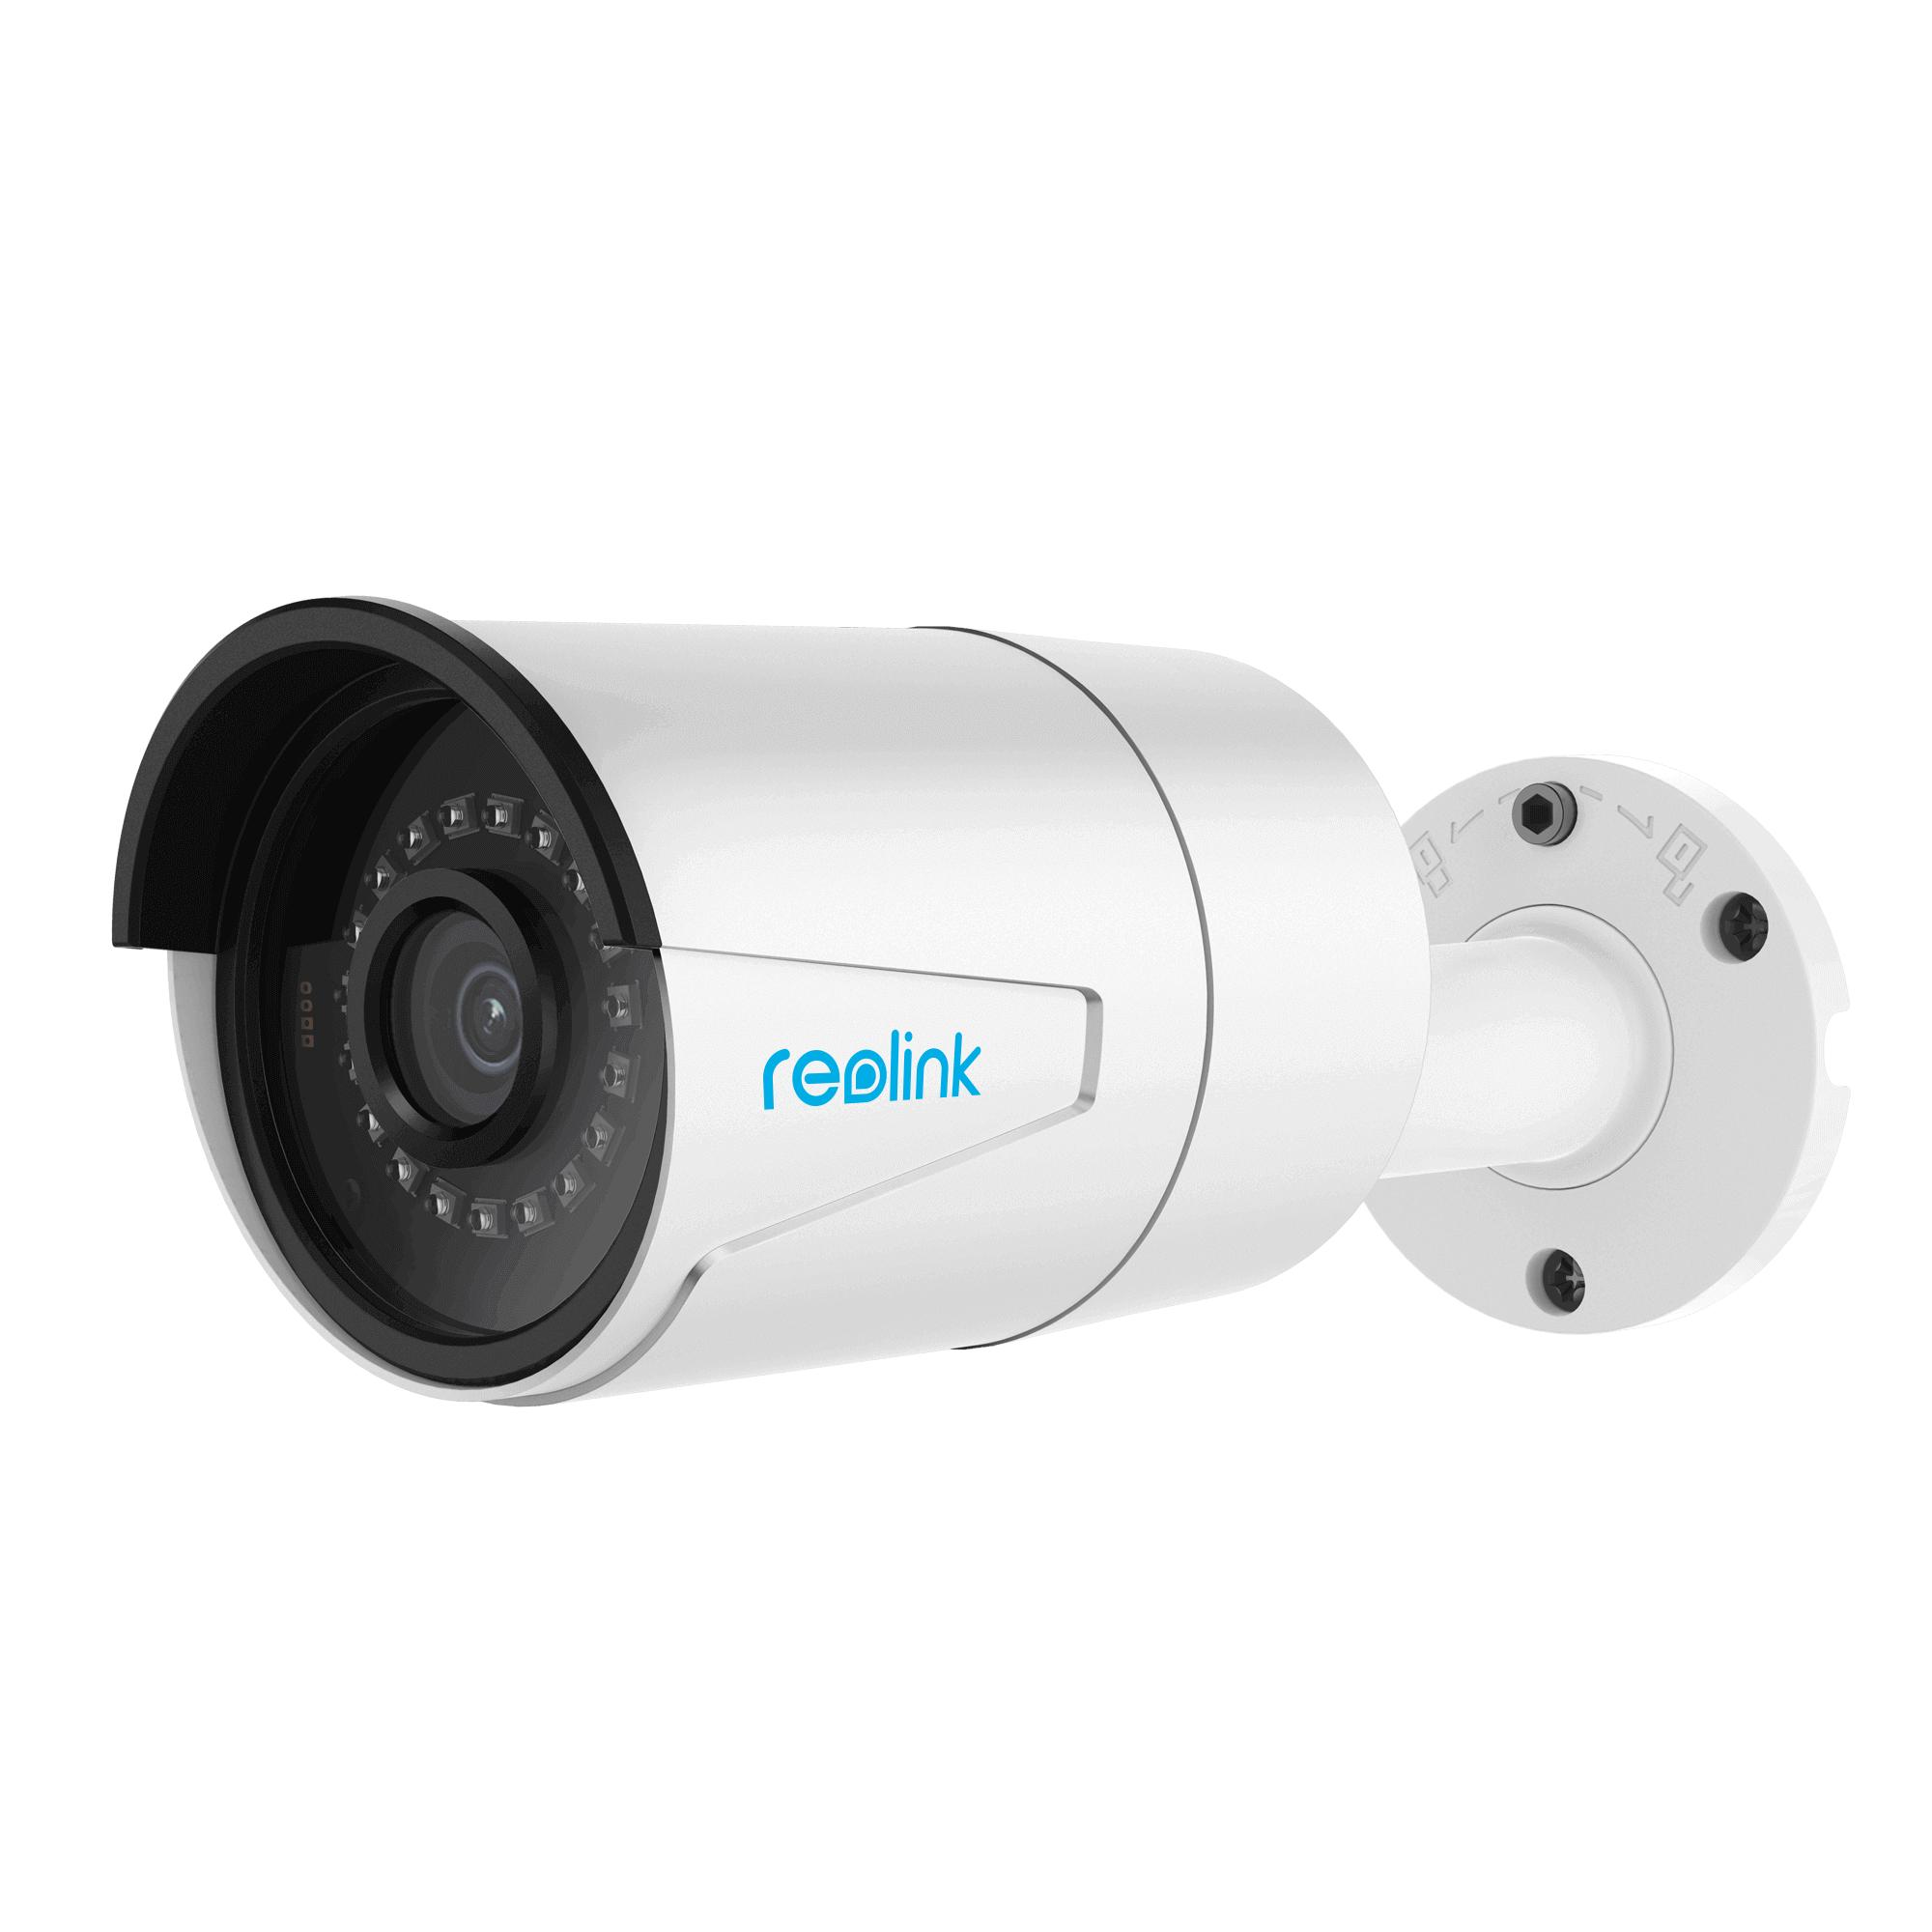 Reolink 4MP outdoor security camera review